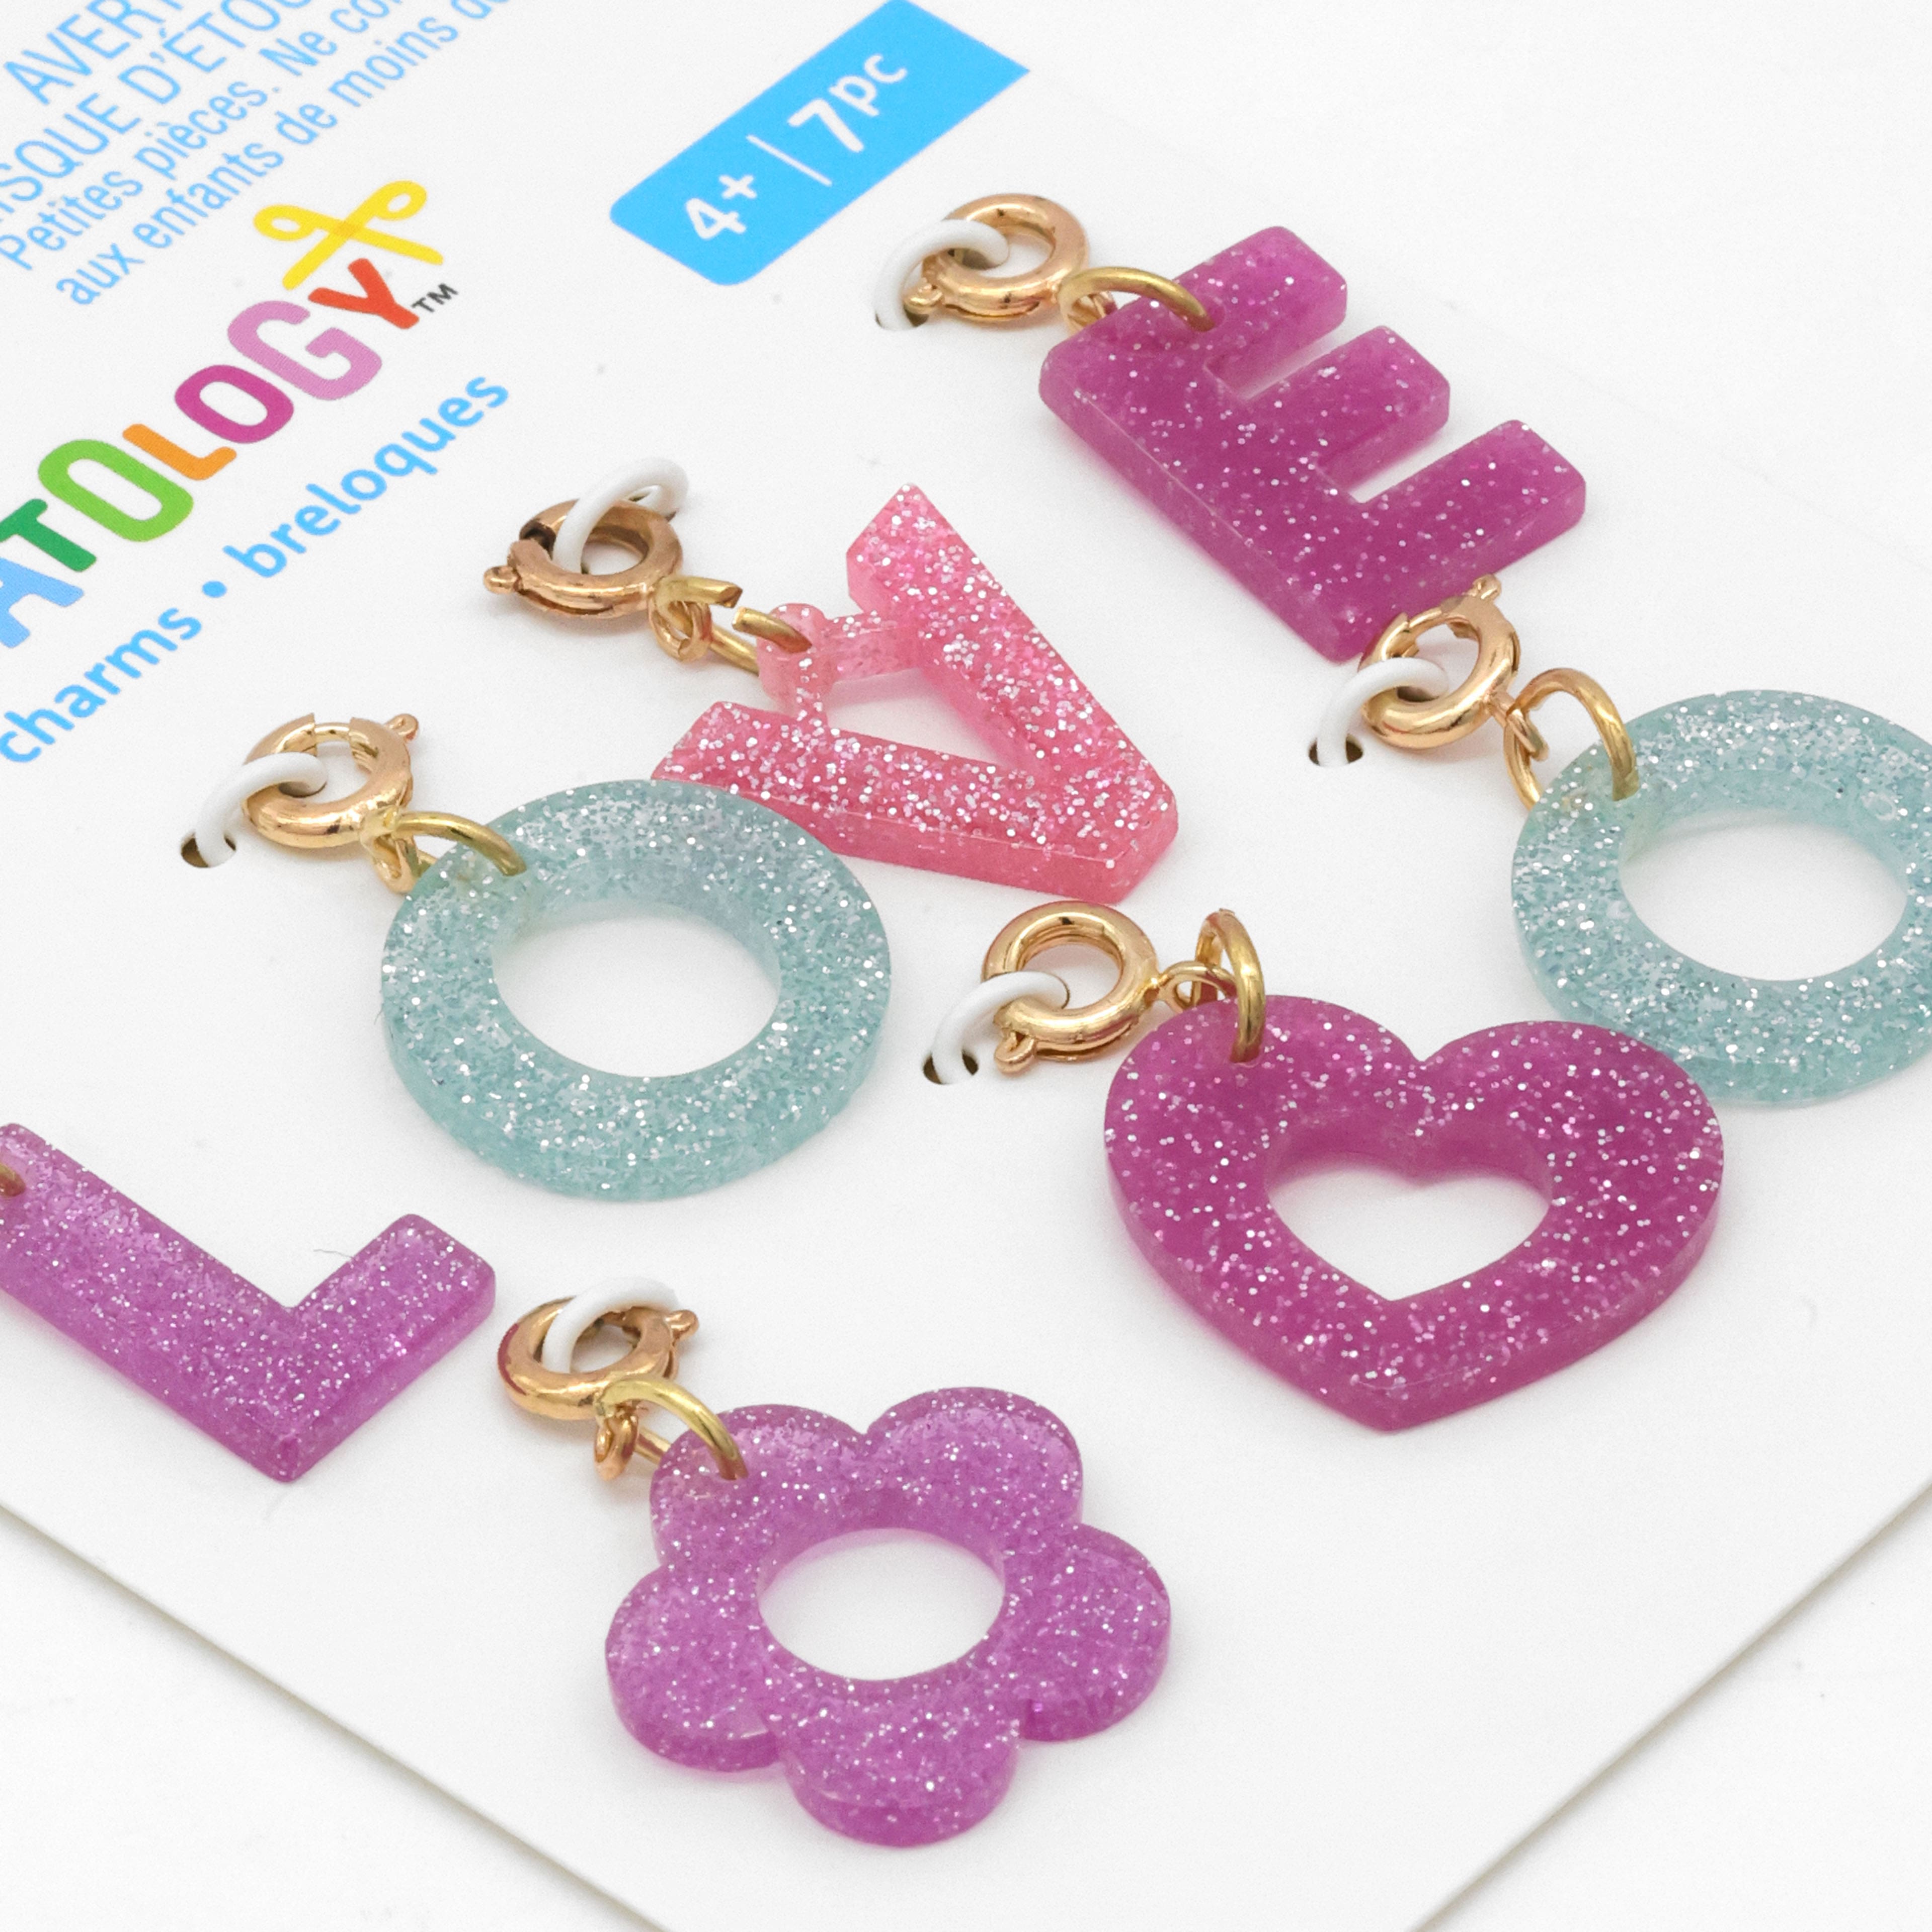 Glittery Love Charms by Creatology&#x2122;